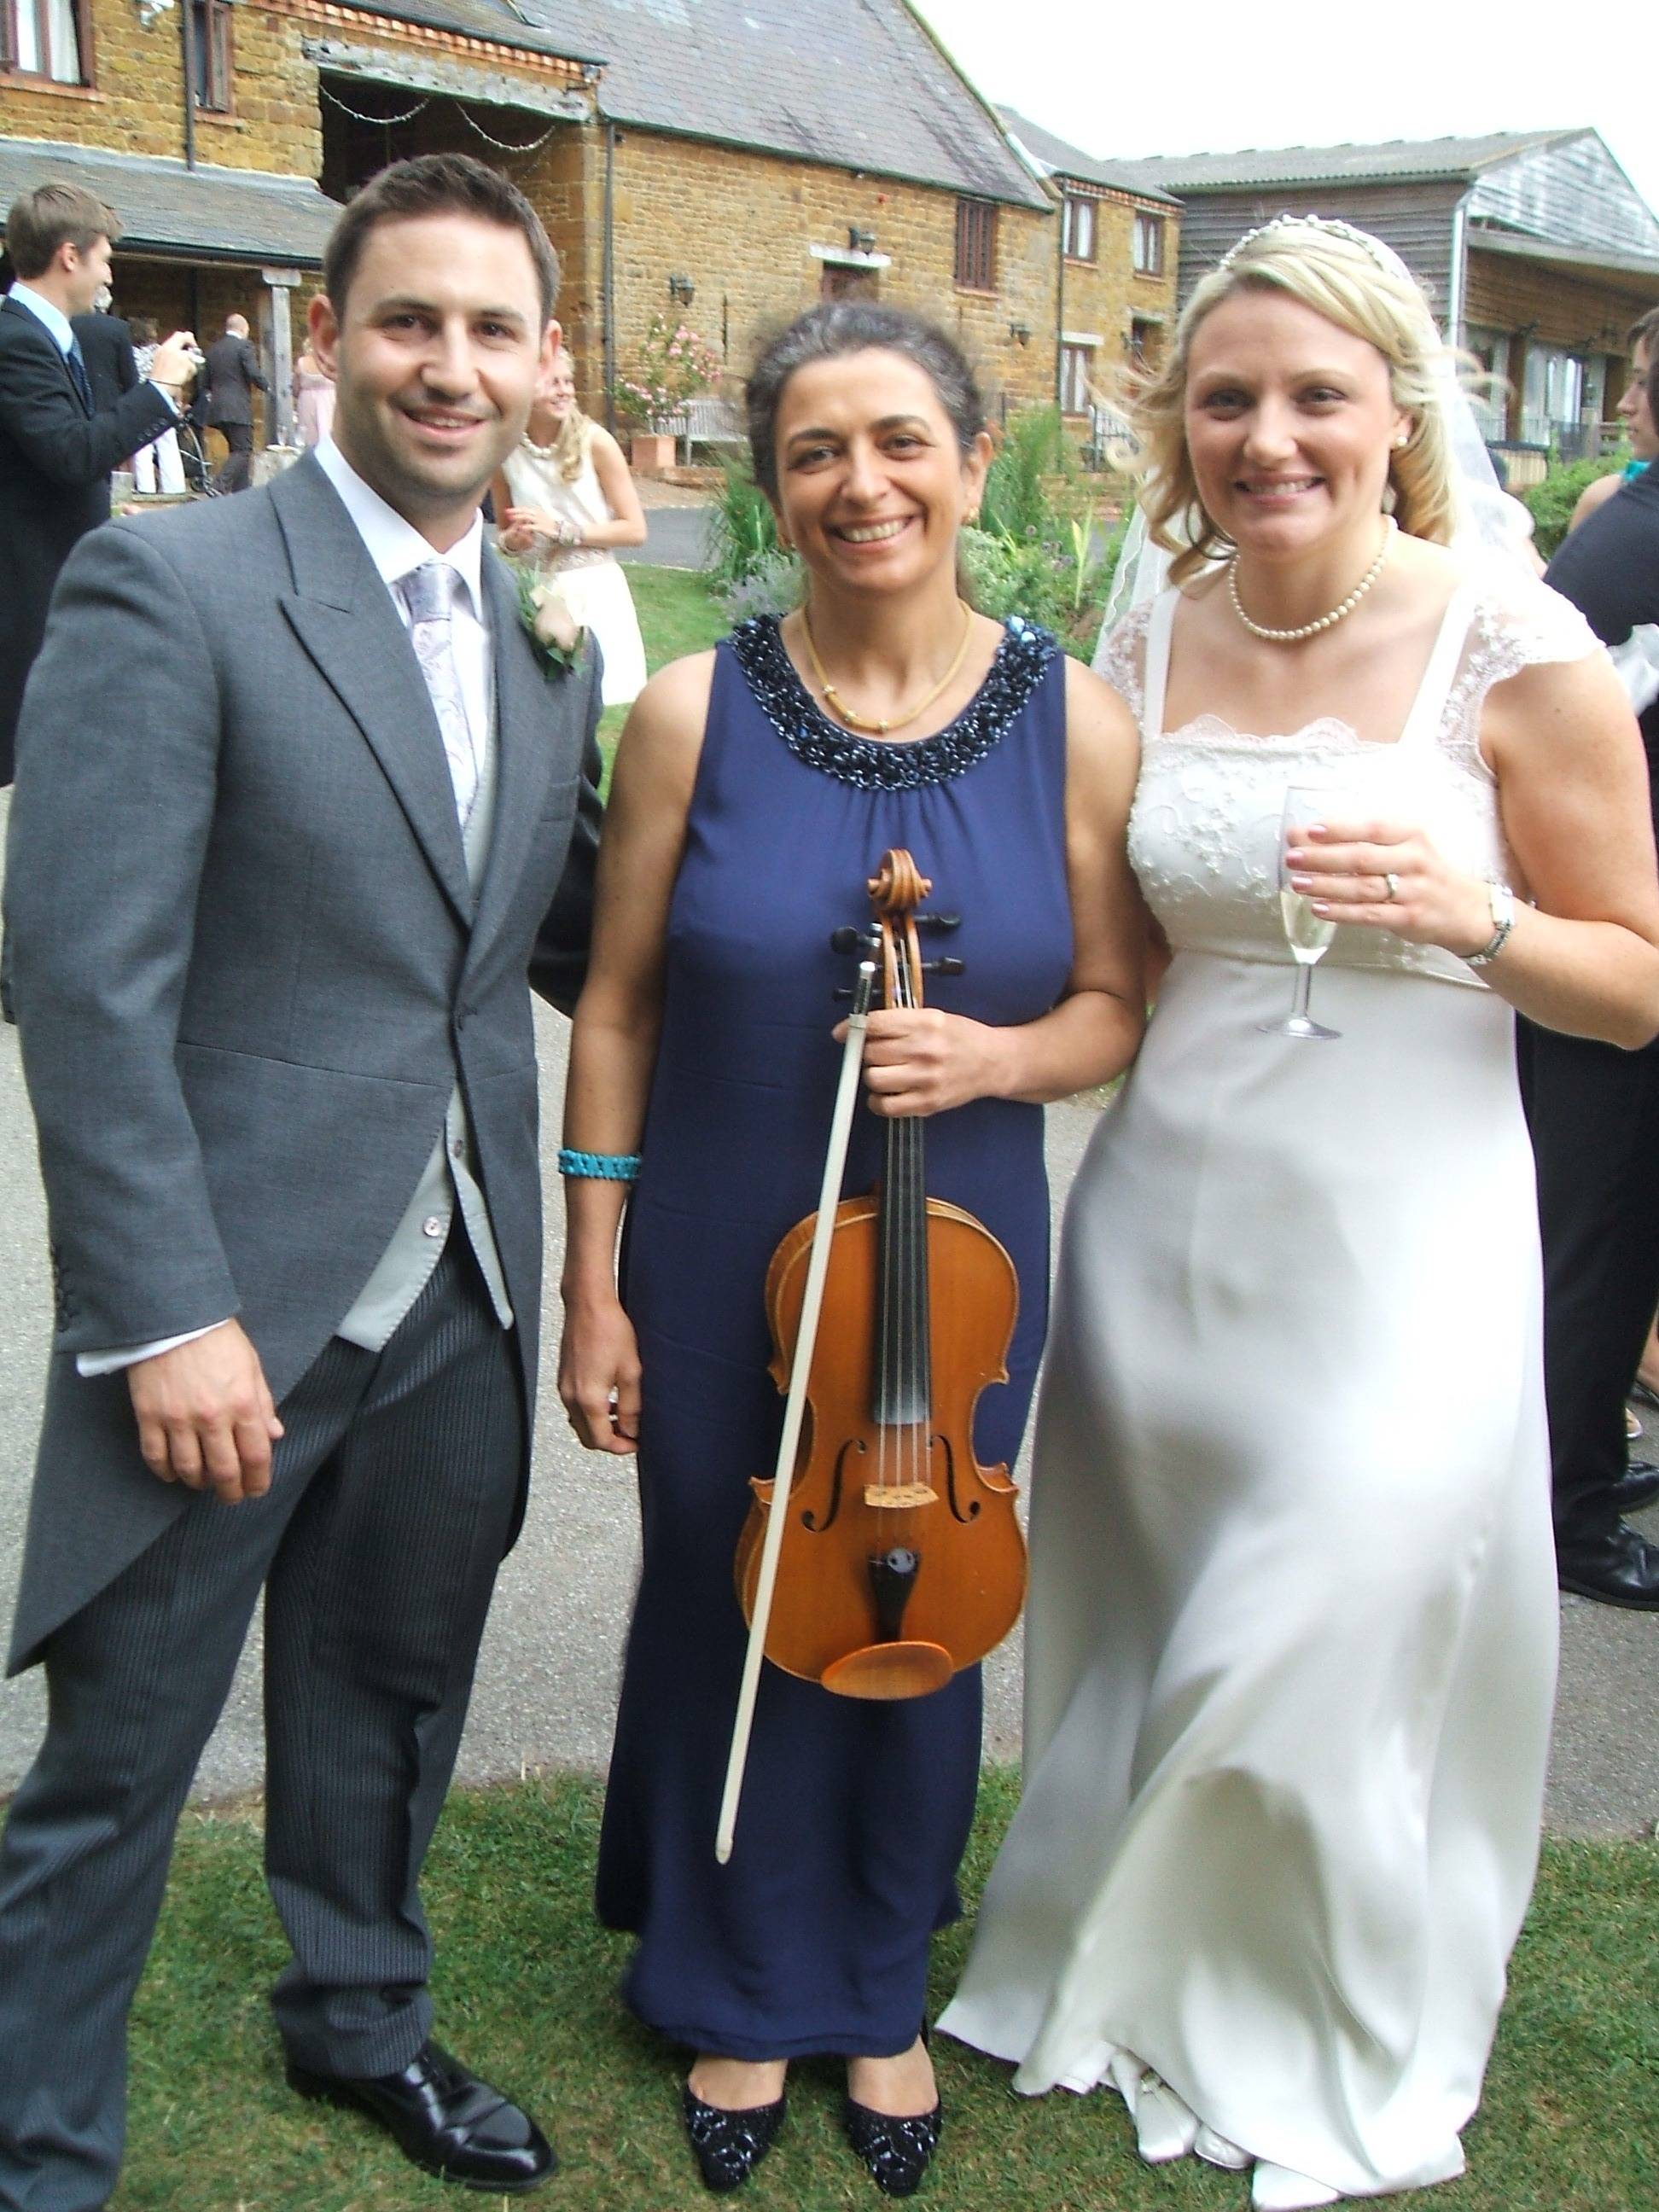 Professional wedding musician in Oxford. Violin, viola. Ceremony, reception, your favourite music played on the mellow viola